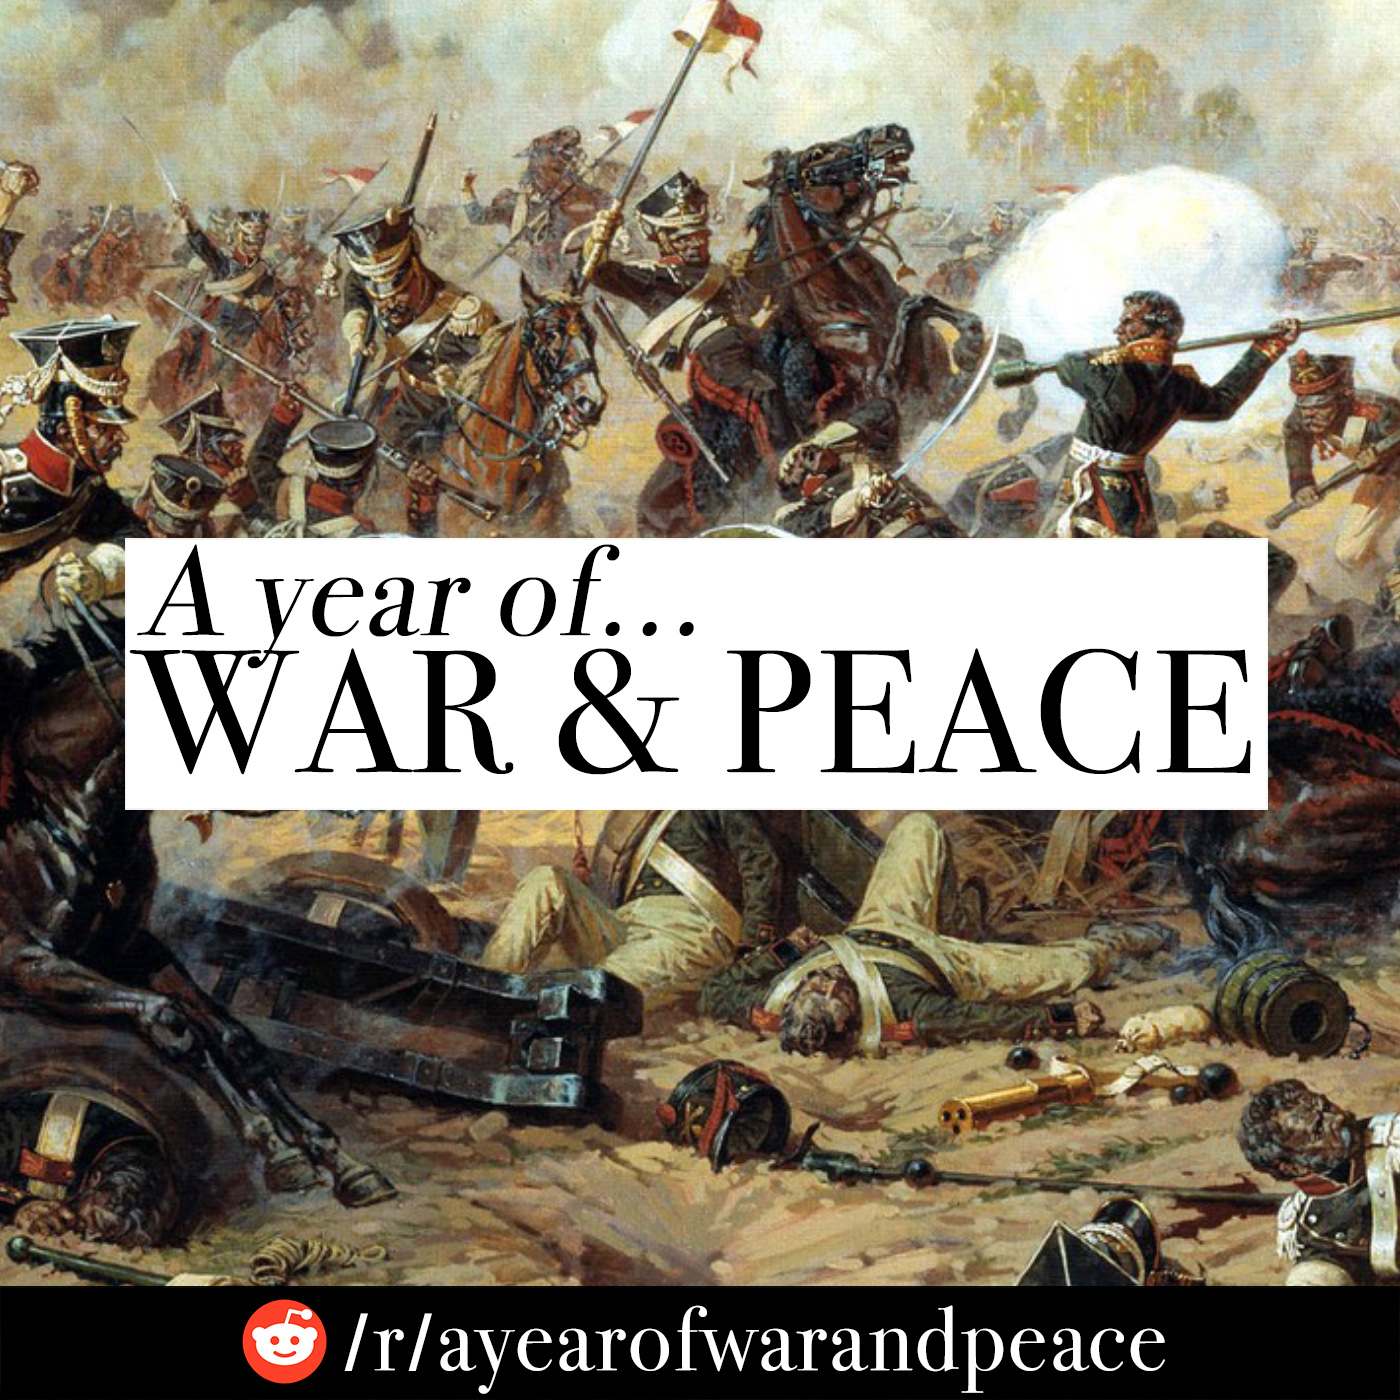 063 - Book 3, Chapter 14. War & Peace Audiobook and Discussion